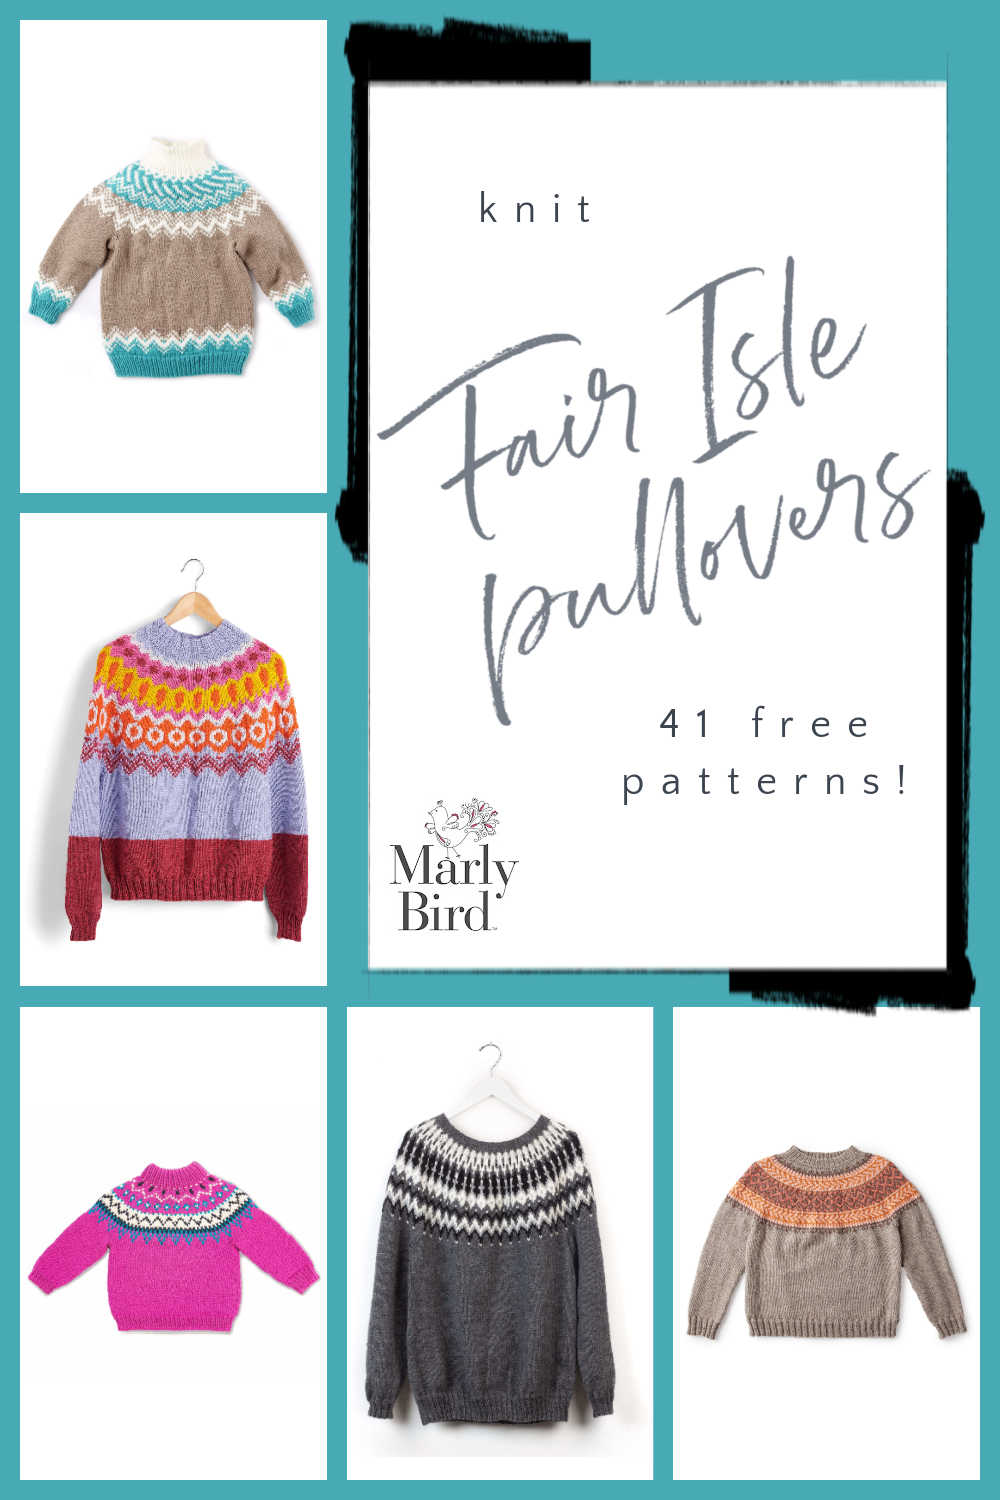 Fair Isle Knit and Crochet Pullover free patterns - Marly Bird